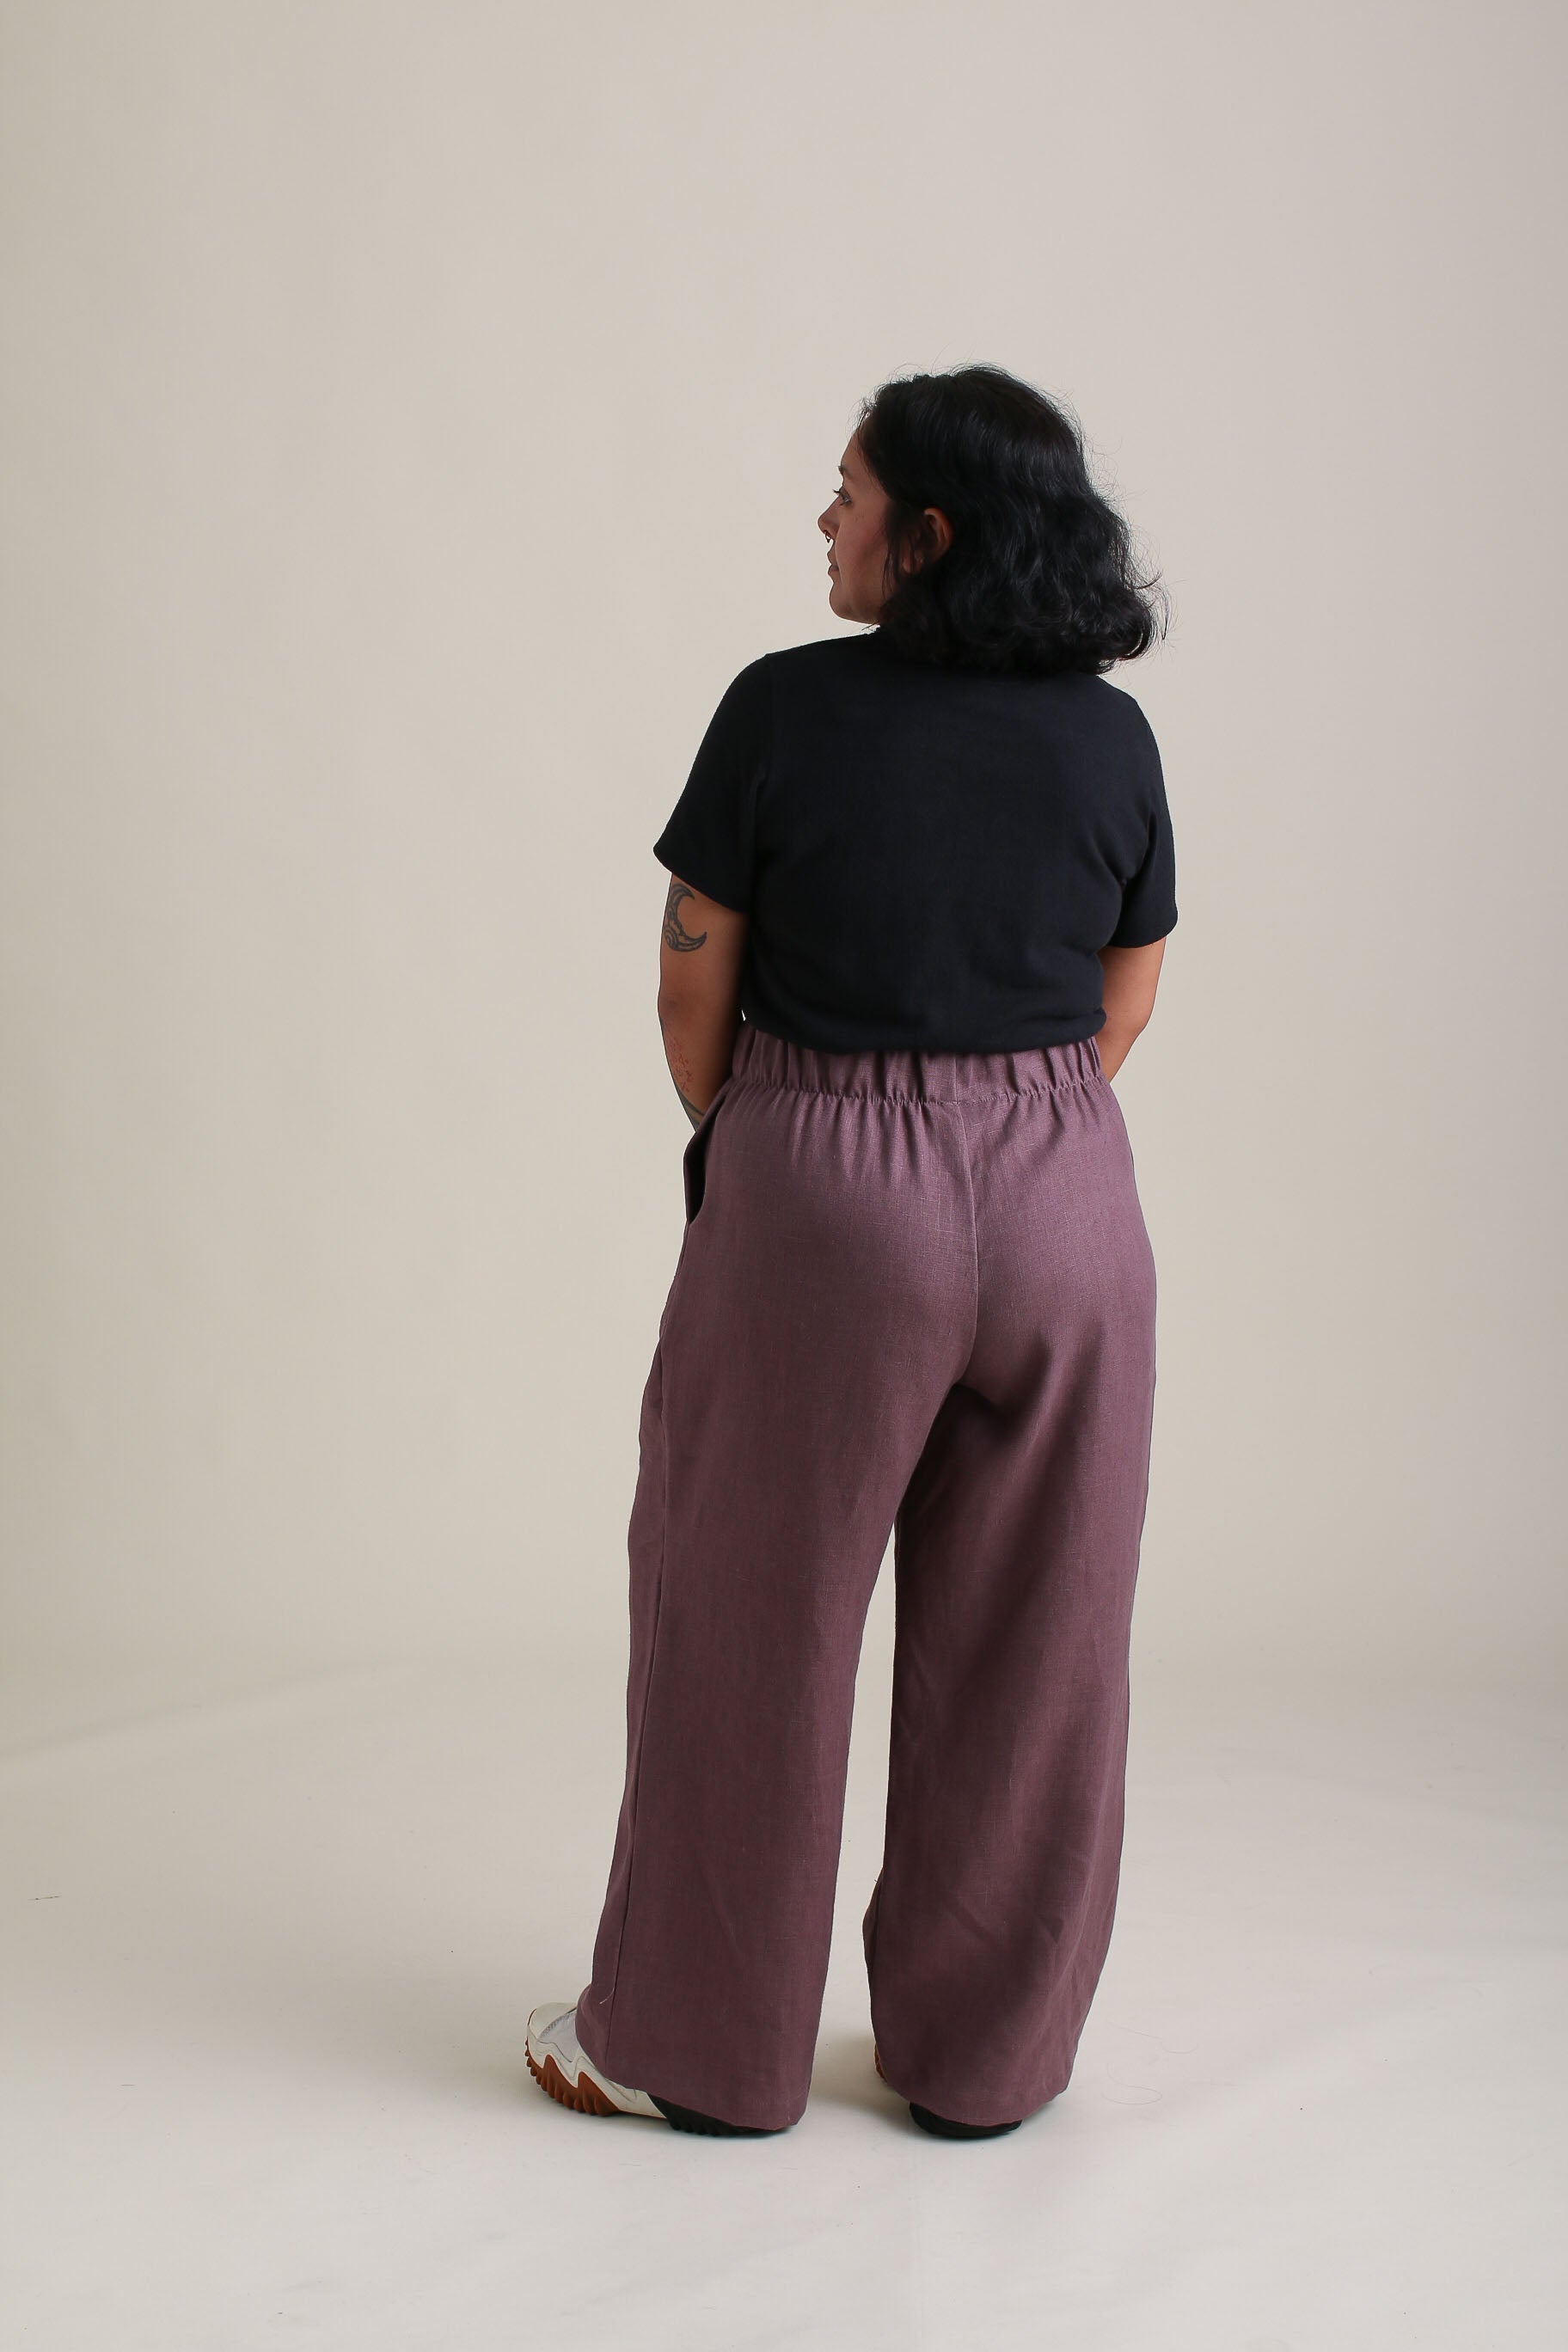 Esme is wearing a size XL 28&quot;.